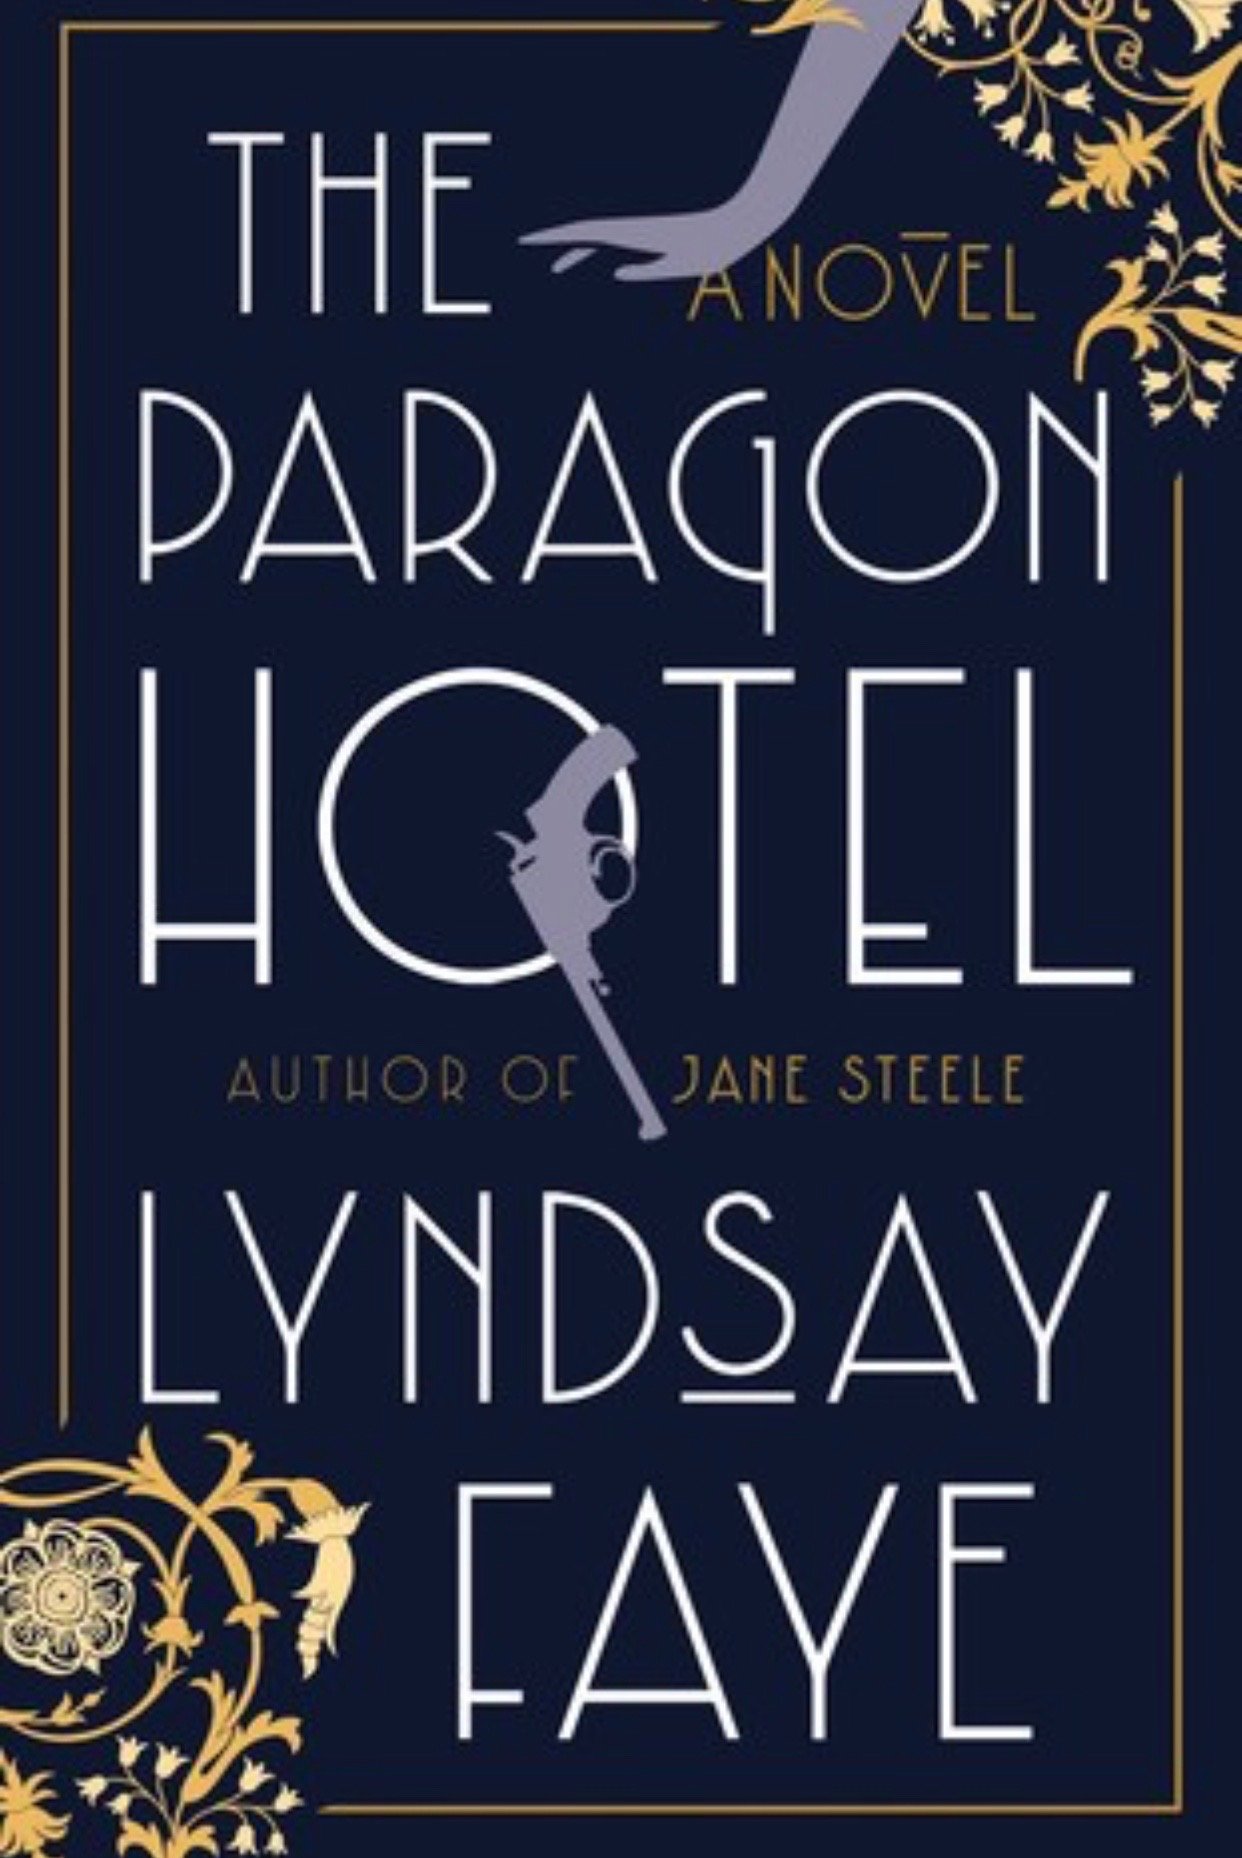 The Paragon Hotel by Lindsay Faye